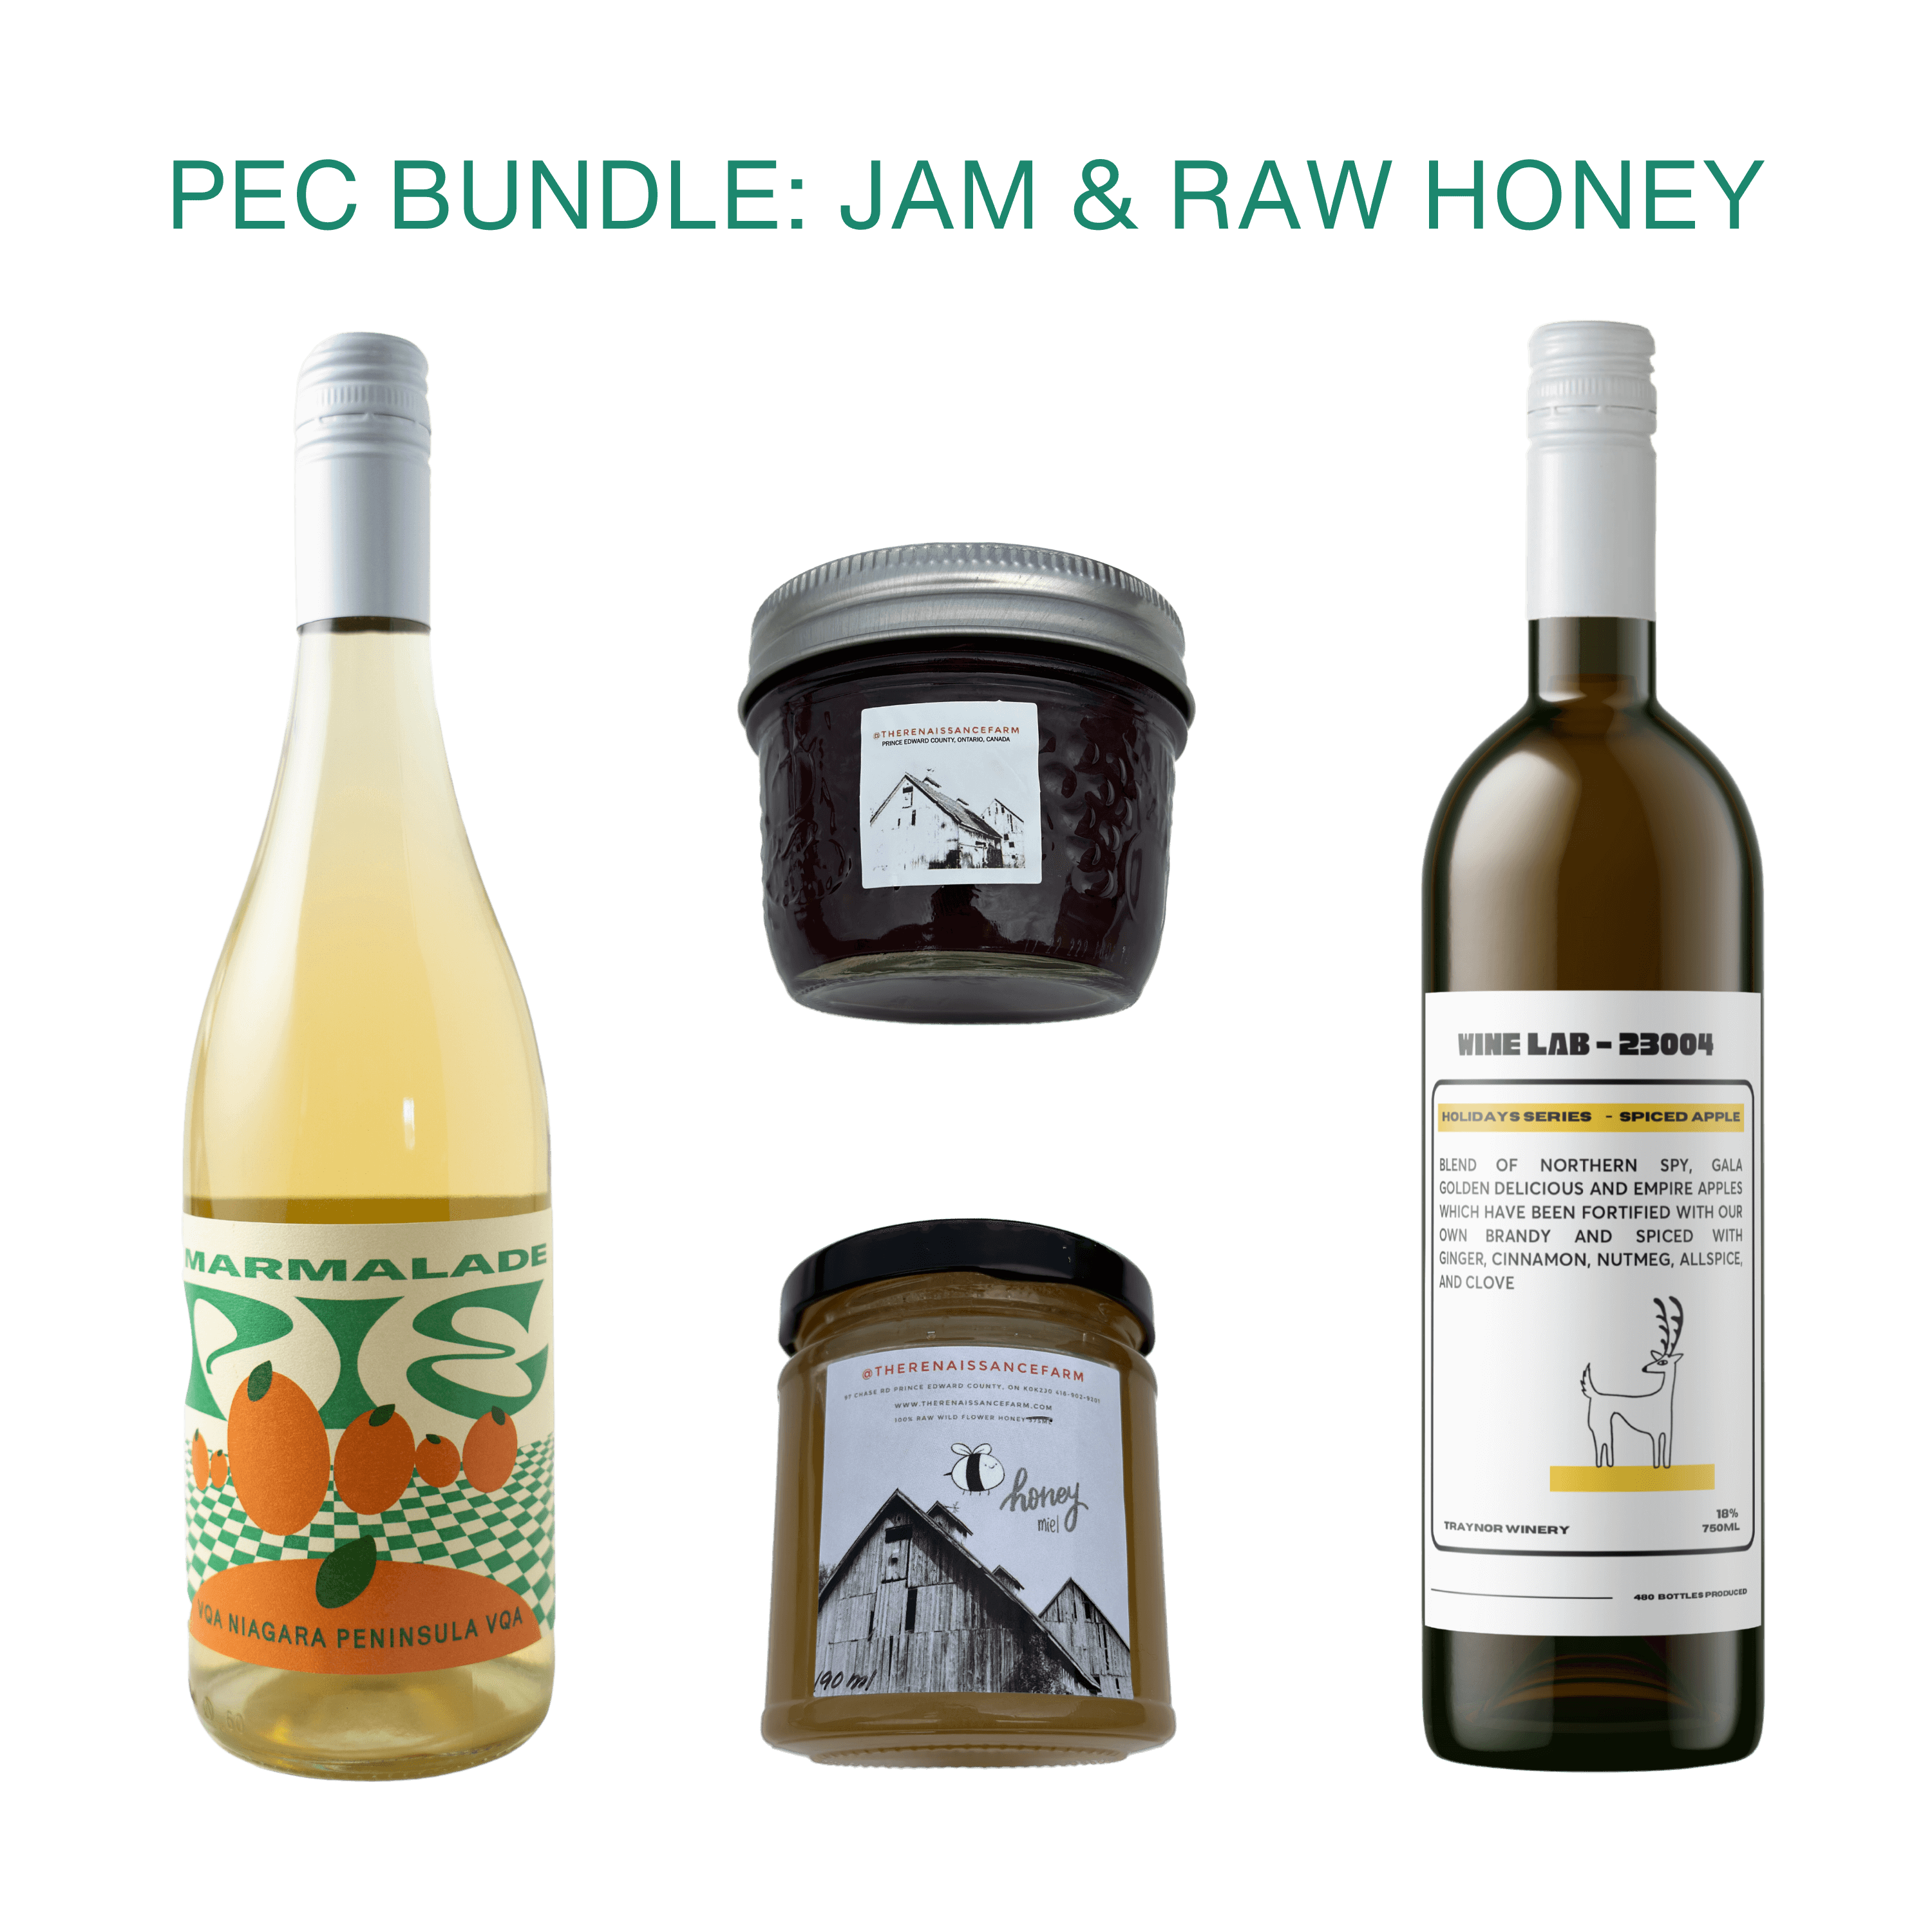 Bundle pack of red white pet-nat sparkling natural wines from Traynor Family Vineyard a winery in Prince Edward County, Ontario Renaissance farm Honey Jams